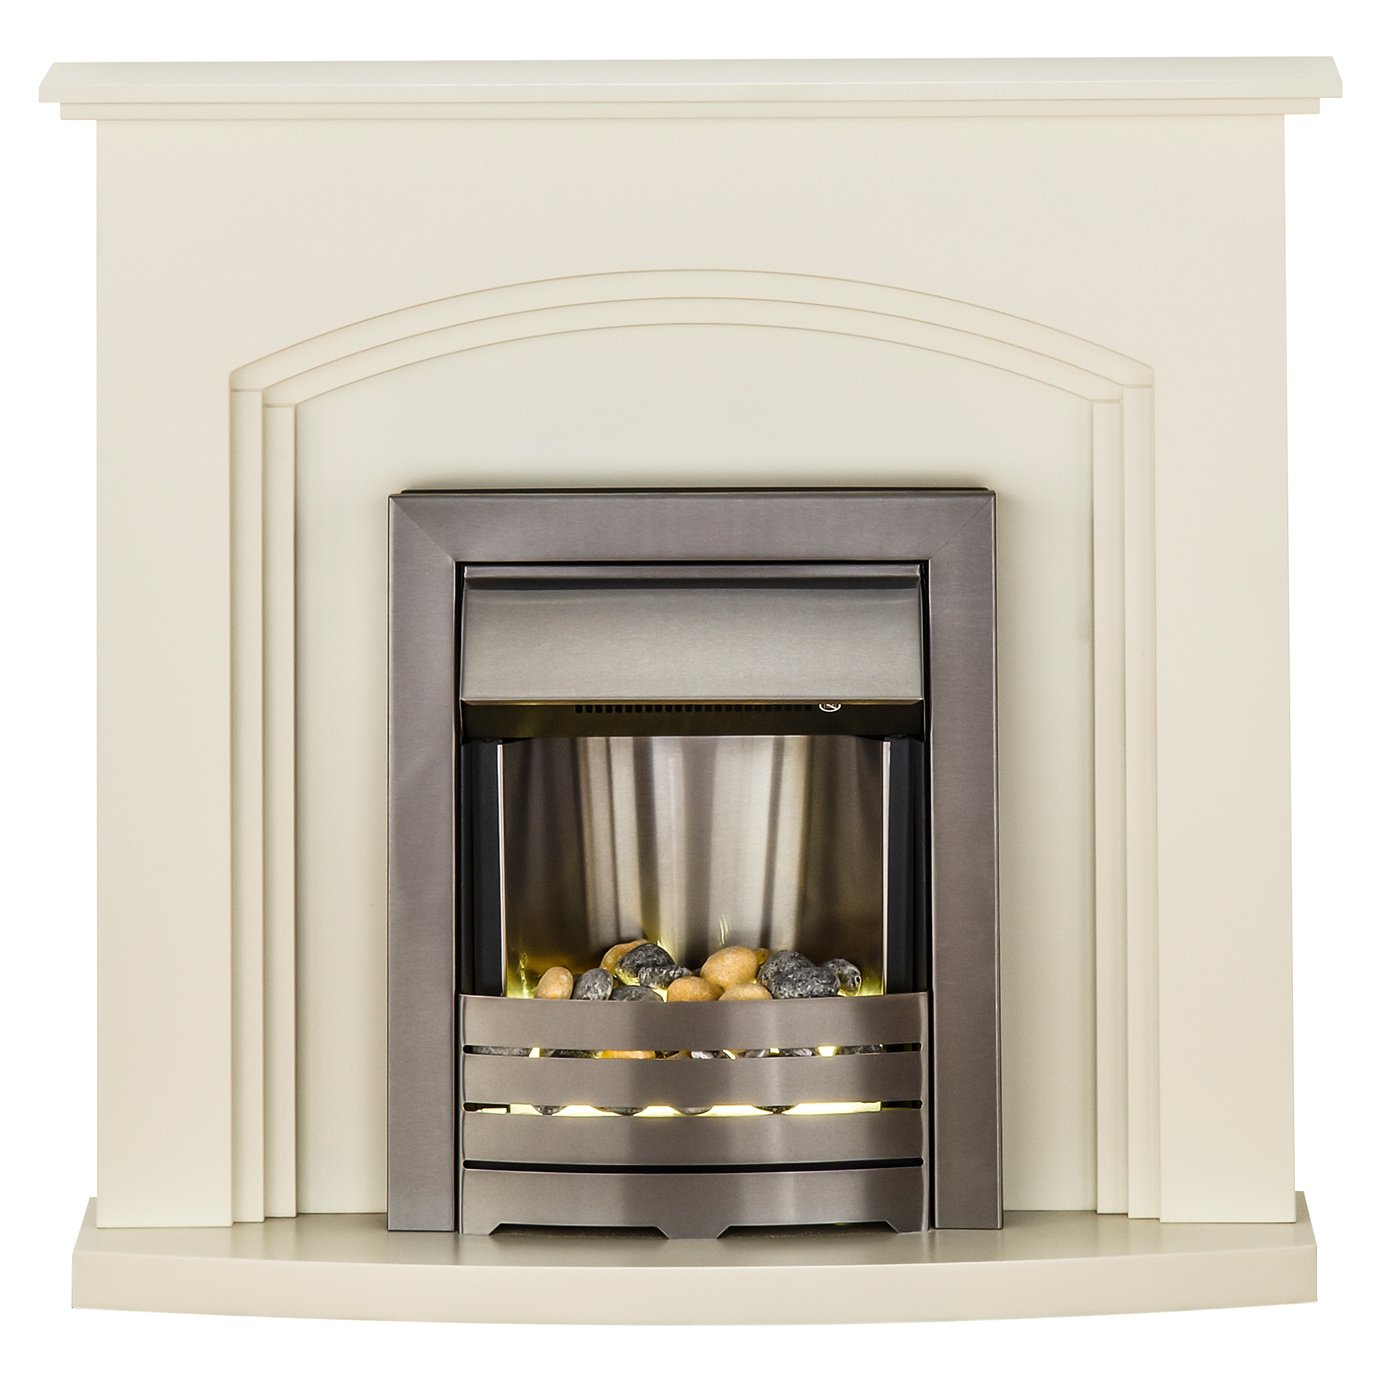 Truro Helios Electric Fire Suite - Cream and Brushed Steel